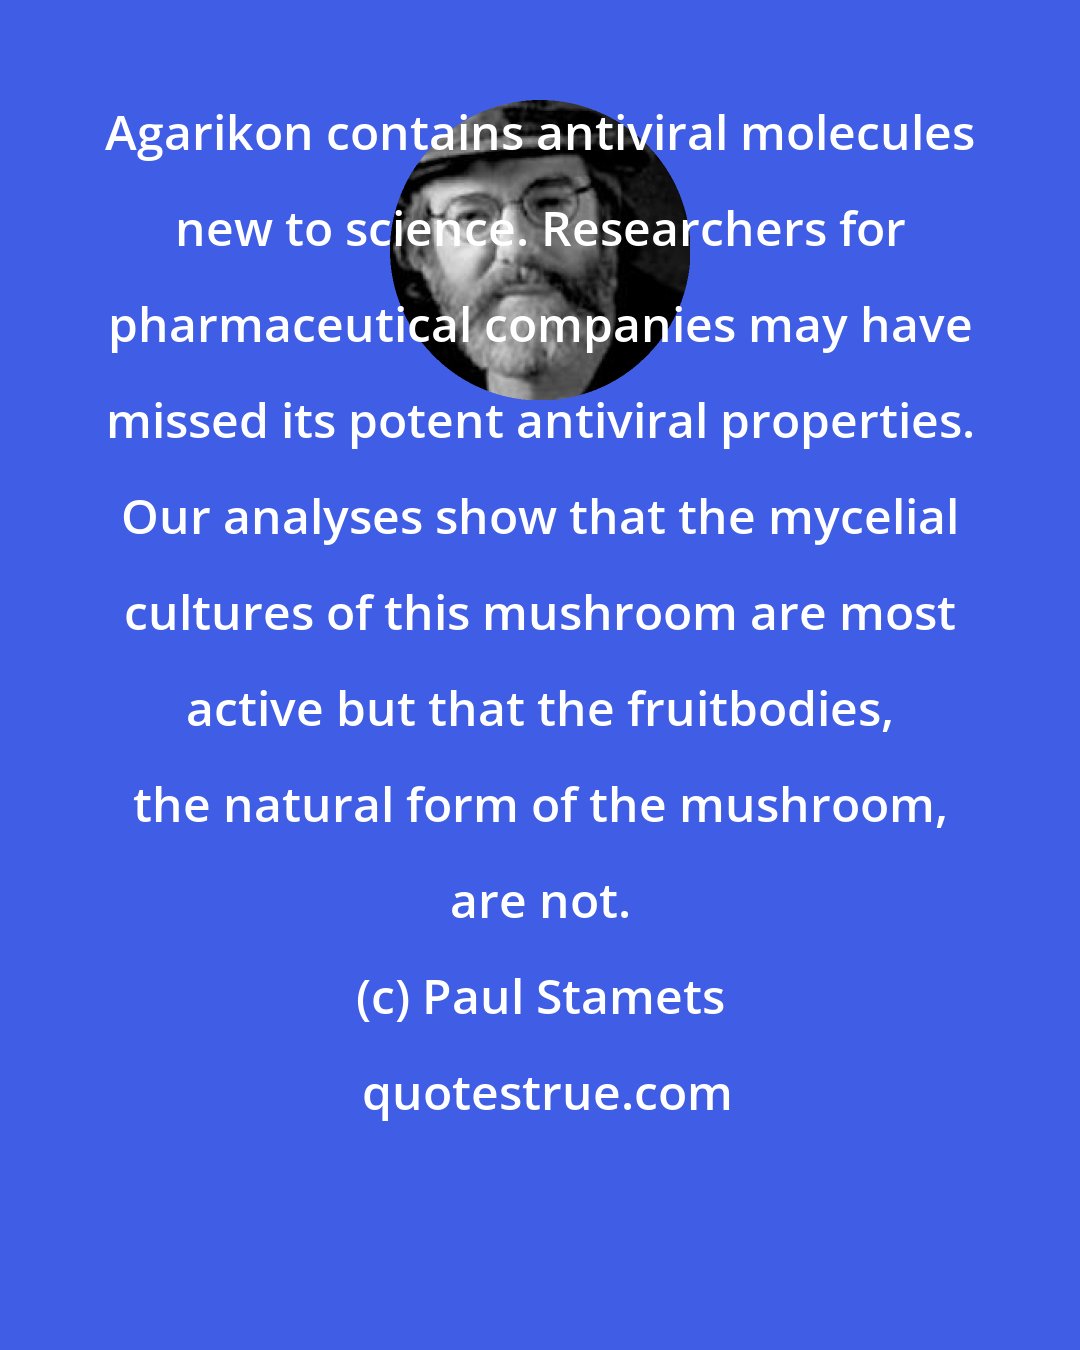 Paul Stamets: Agarikon contains antiviral molecules new to science. Researchers for pharmaceutical companies may have missed its potent antiviral properties. Our analyses show that the mycelial cultures of this mushroom are most active but that the fruitbodies, the natural form of the mushroom, are not.